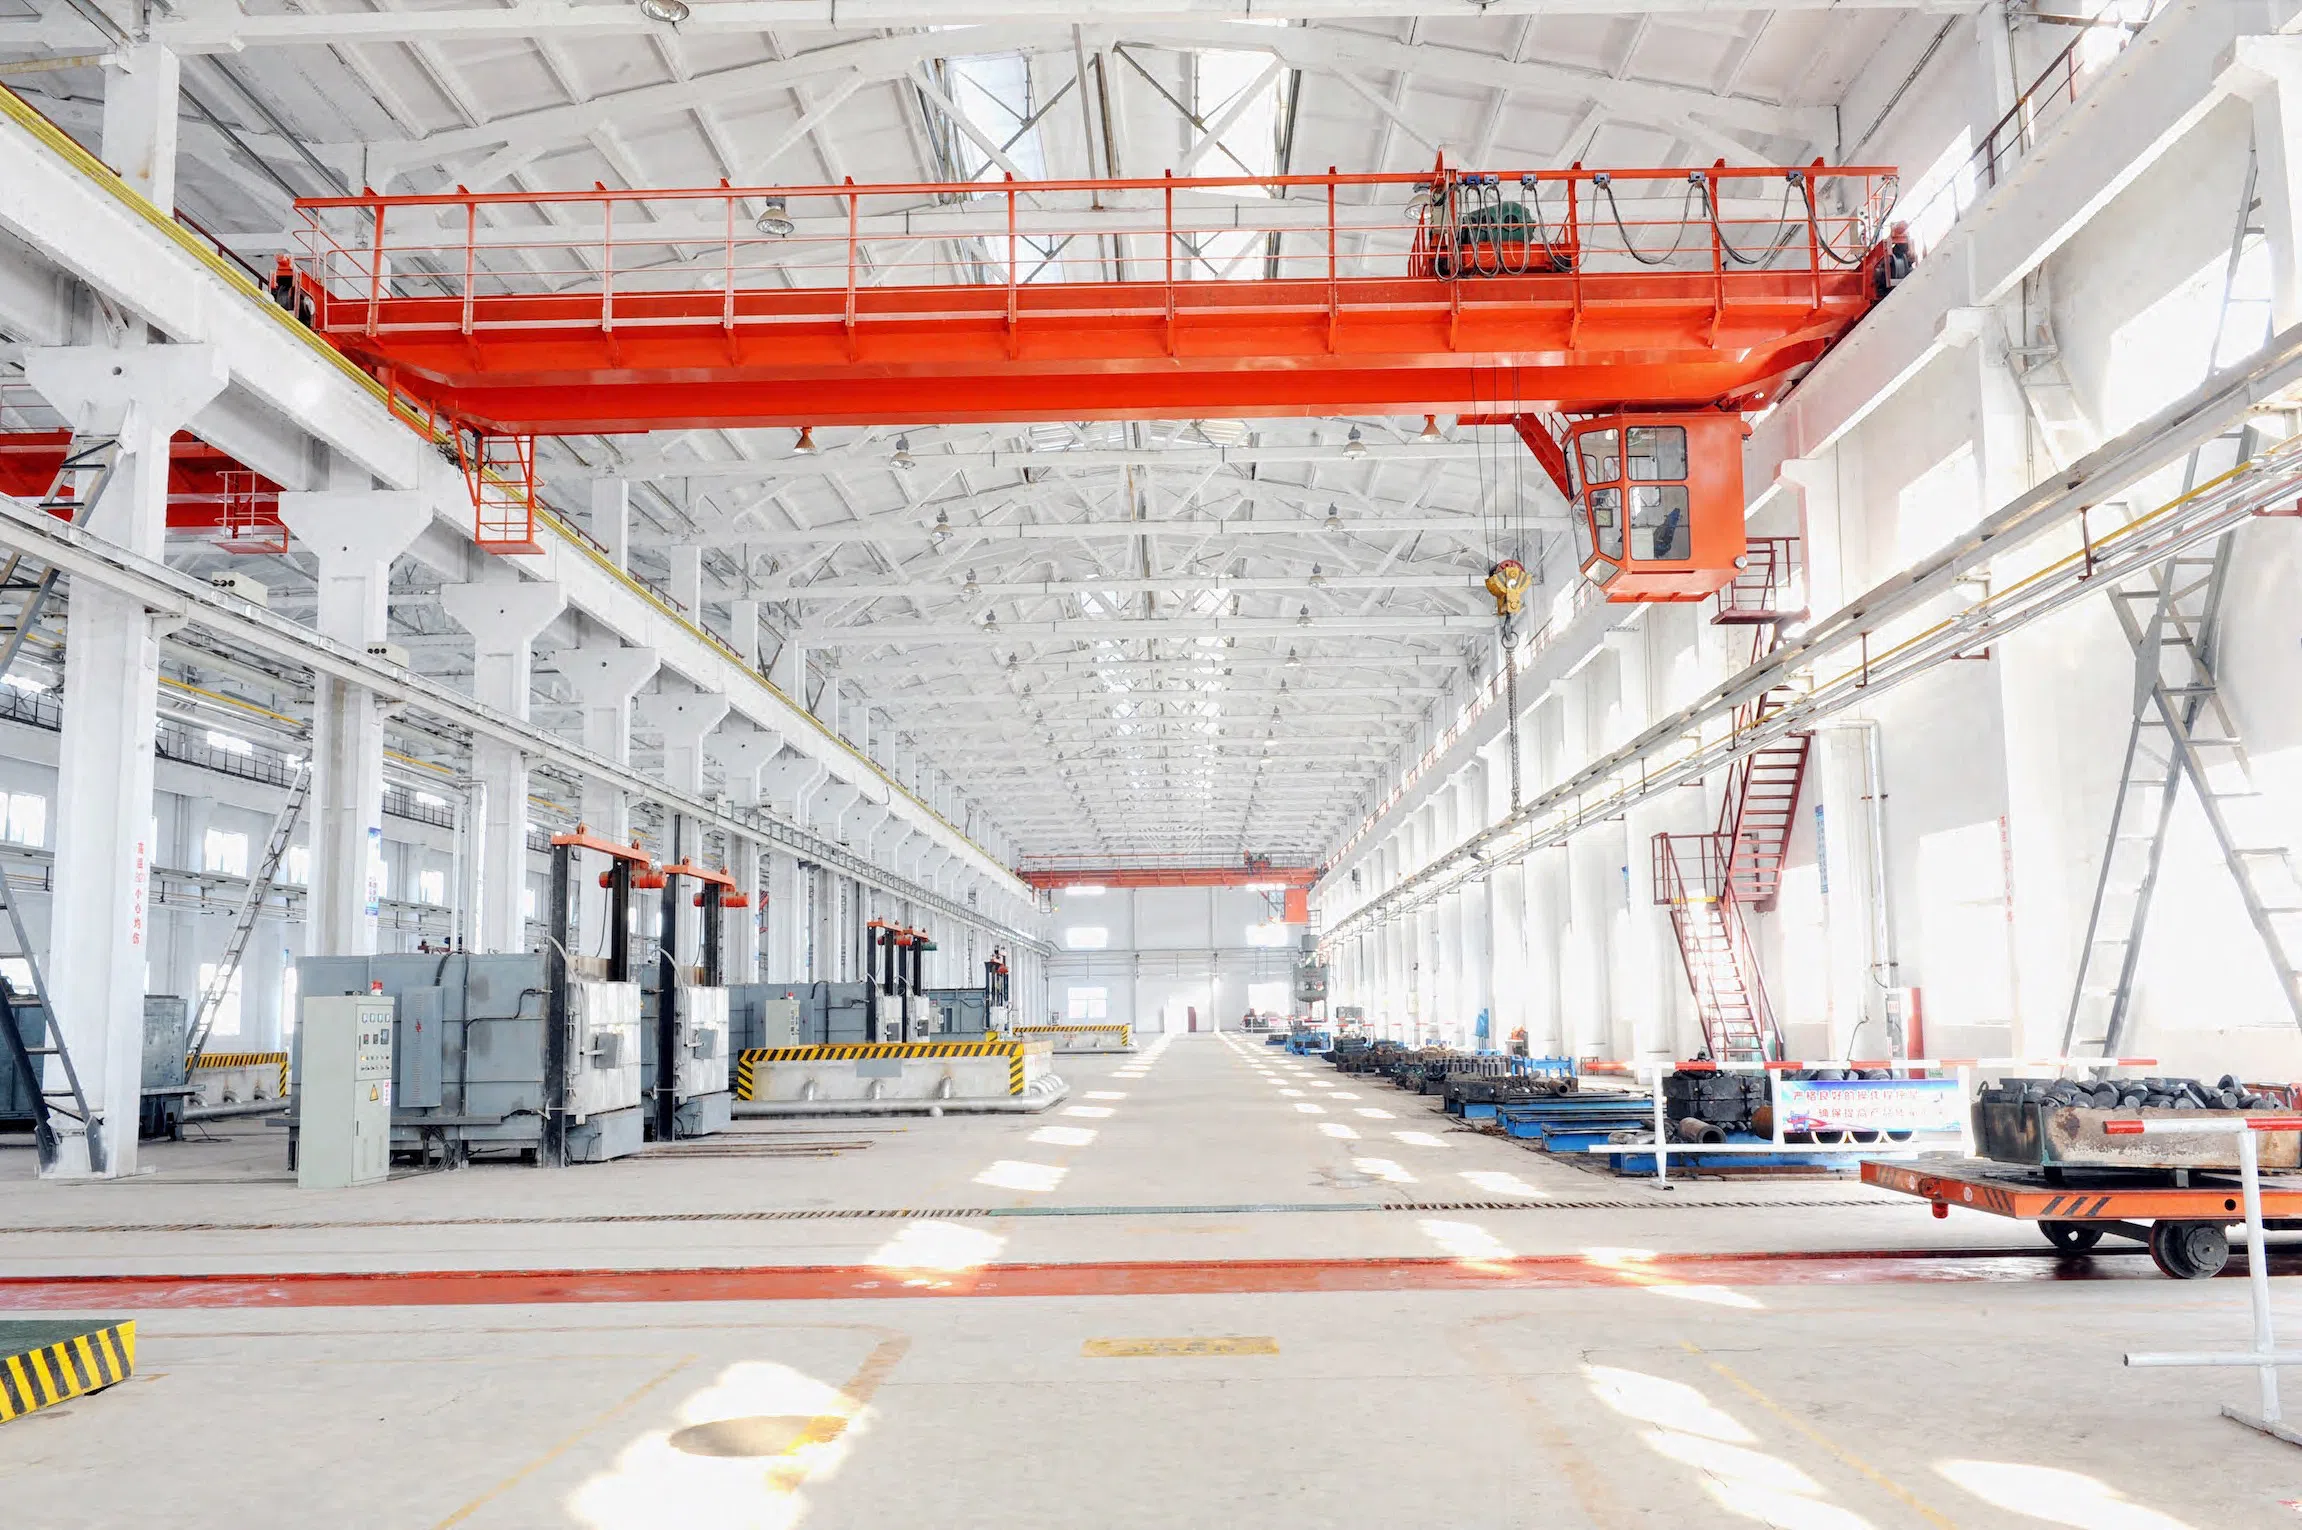 Photo Showing a Warehouse with a Large Bridge Crane Installation.